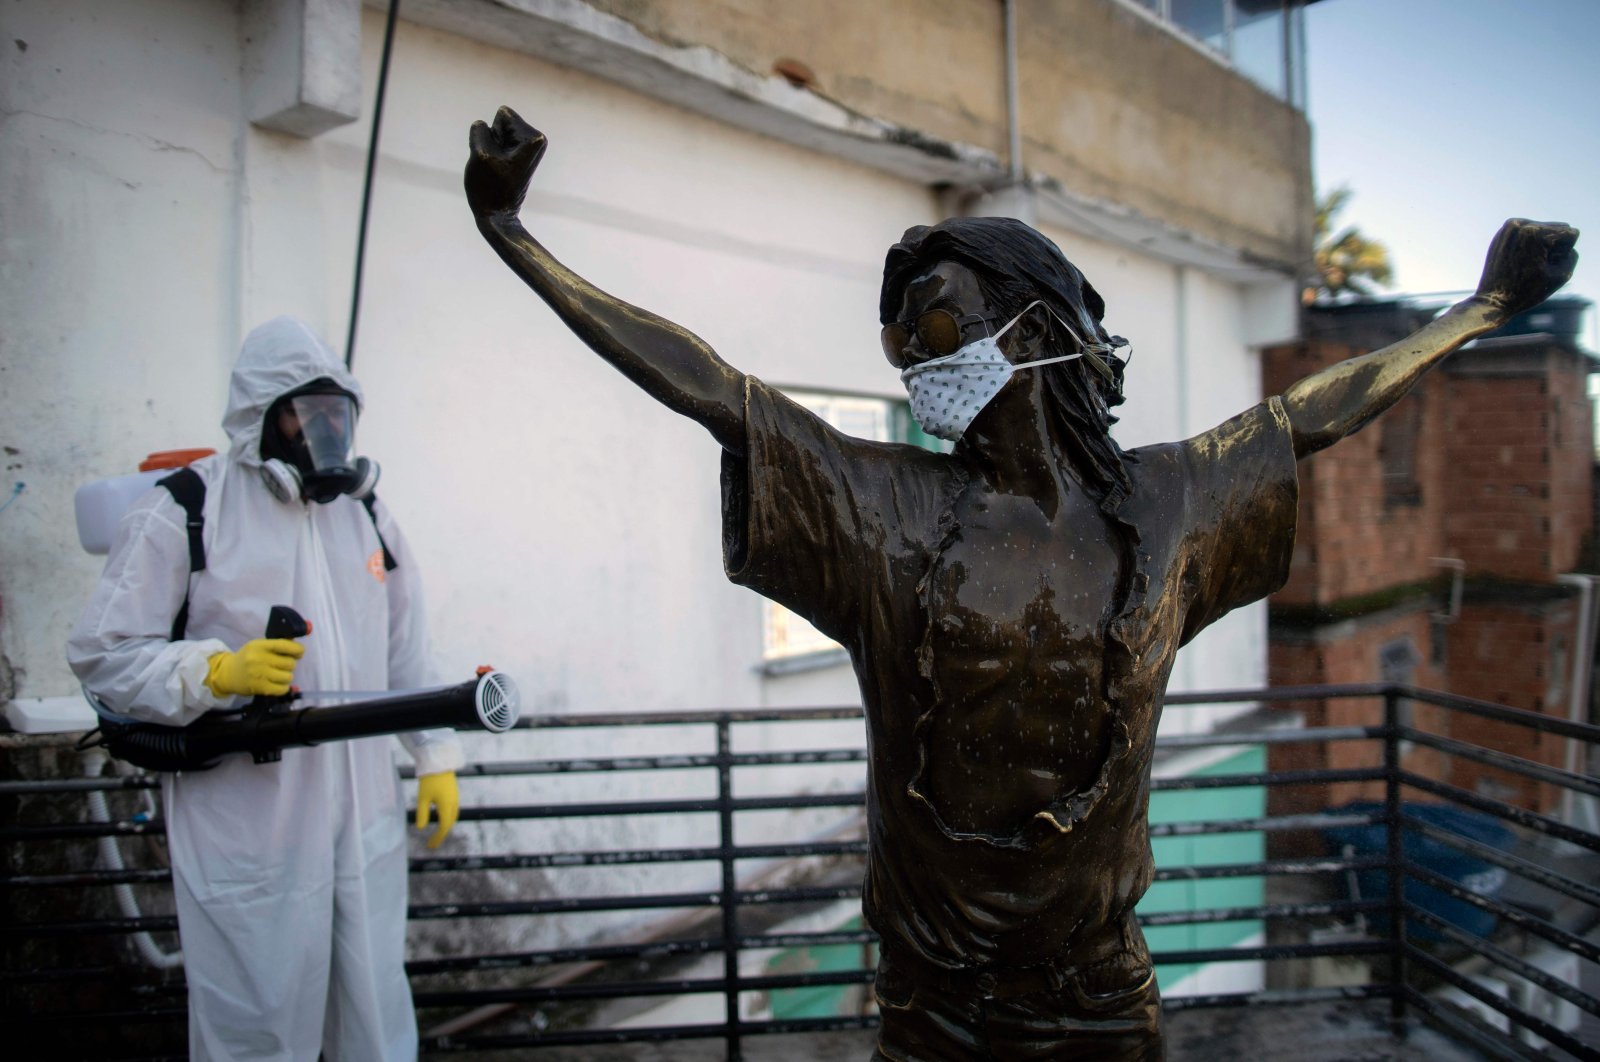 A volunteer disinfects the statue of US singer Michael Jackson, at the Santa Marta favela in Rio de Janeiro, Brazil, during the COVID-19 coronavirus pandemic on April 20, 2020. (AFP Photo)